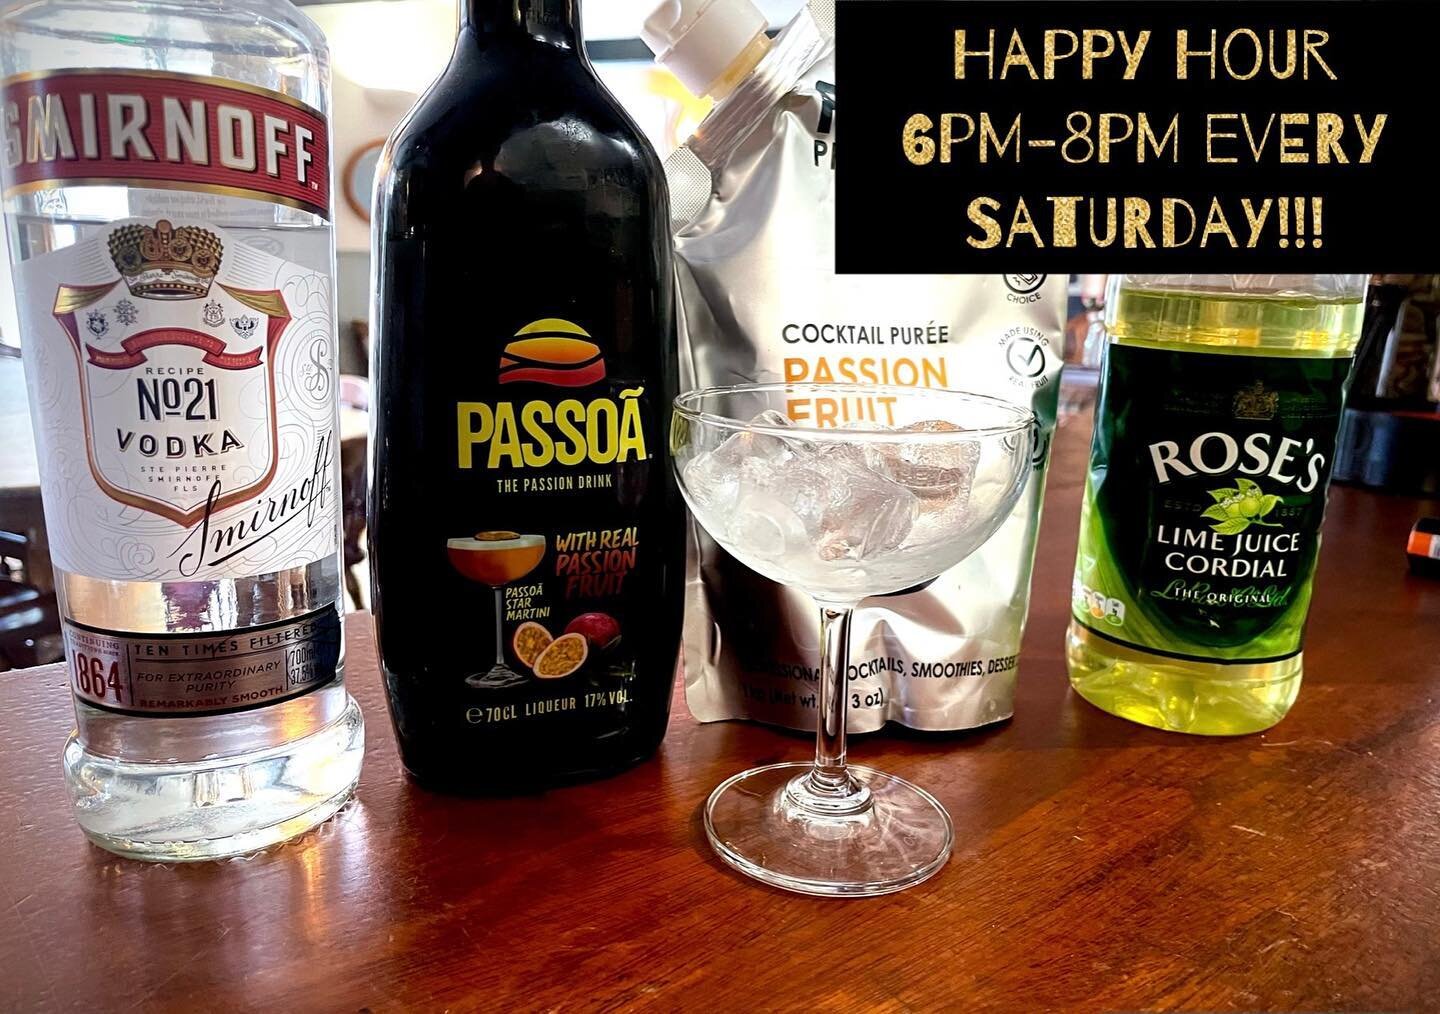 Struggling for plans on a Saturday night? 💃🏼🕺🏼 Why not come down with friends for our cocktail happy hour!! (Yes we know it&rsquo;s actually 2 hours!! 🤫🤫) #summerholidays #hampshirepub #saturdaynight #southampton #droxford #happyhour